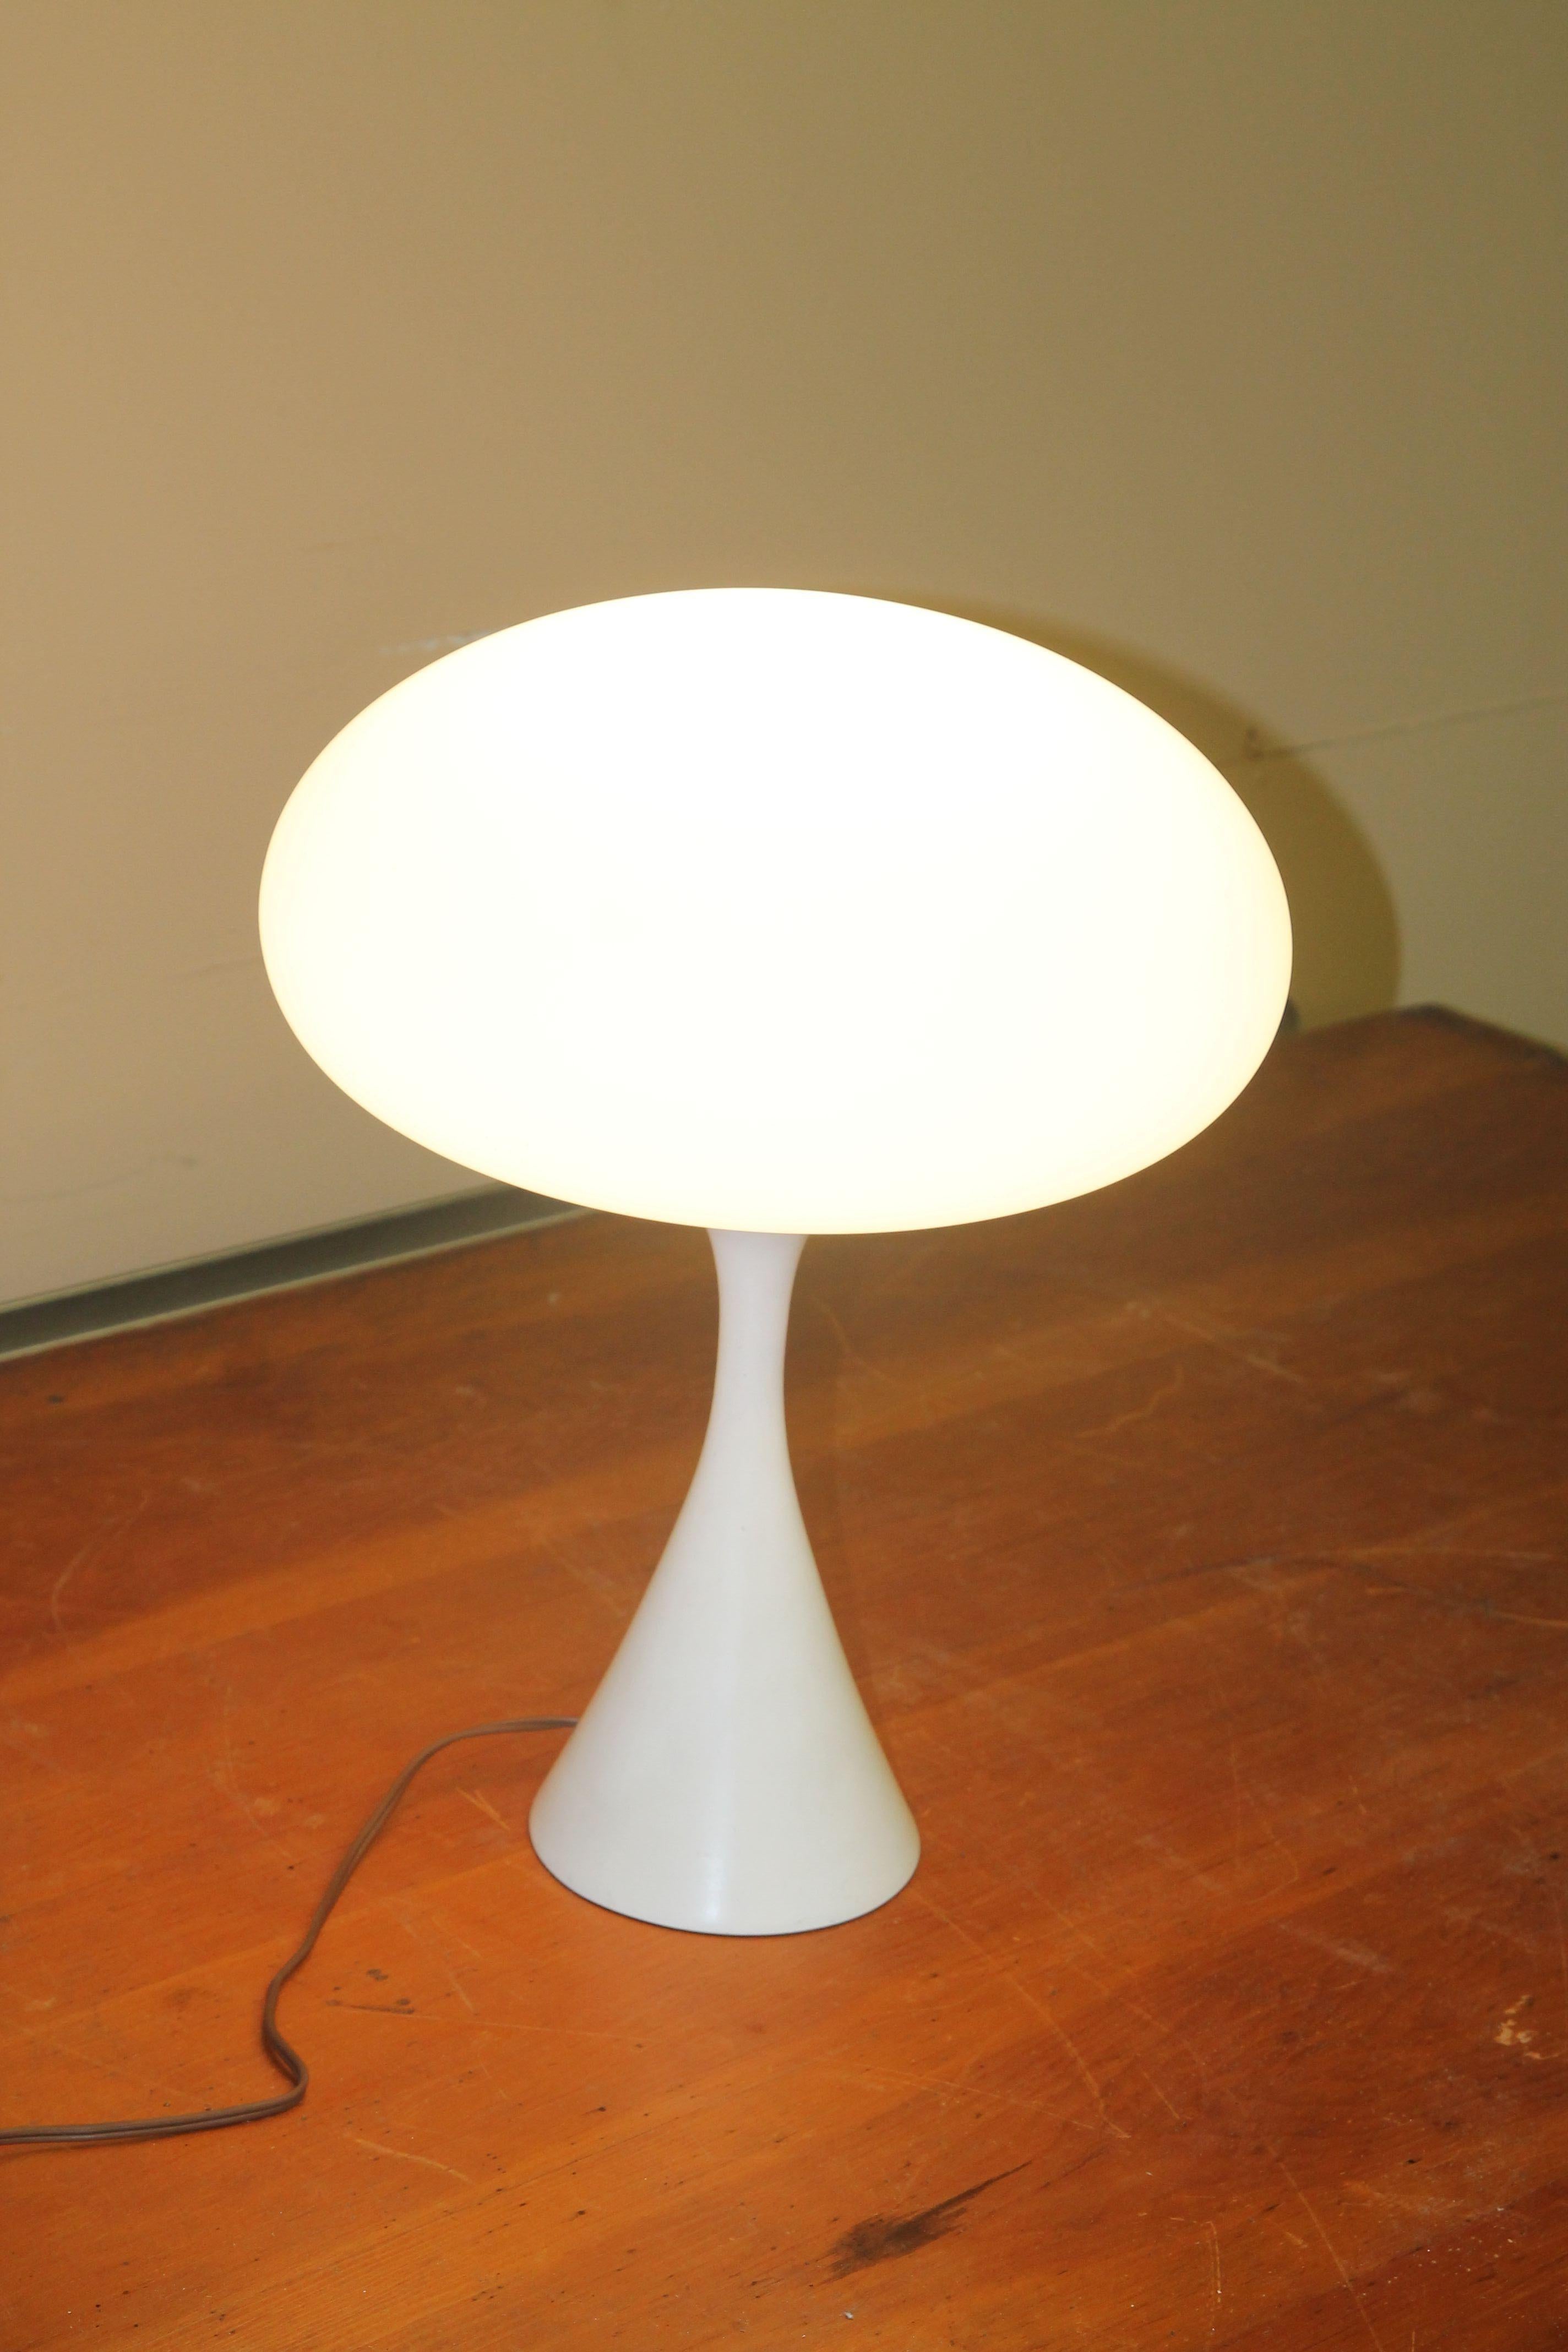 Classic Laurel Mushroom Lamp. This iconic table lamp never goes out of style and will look great in any setting.